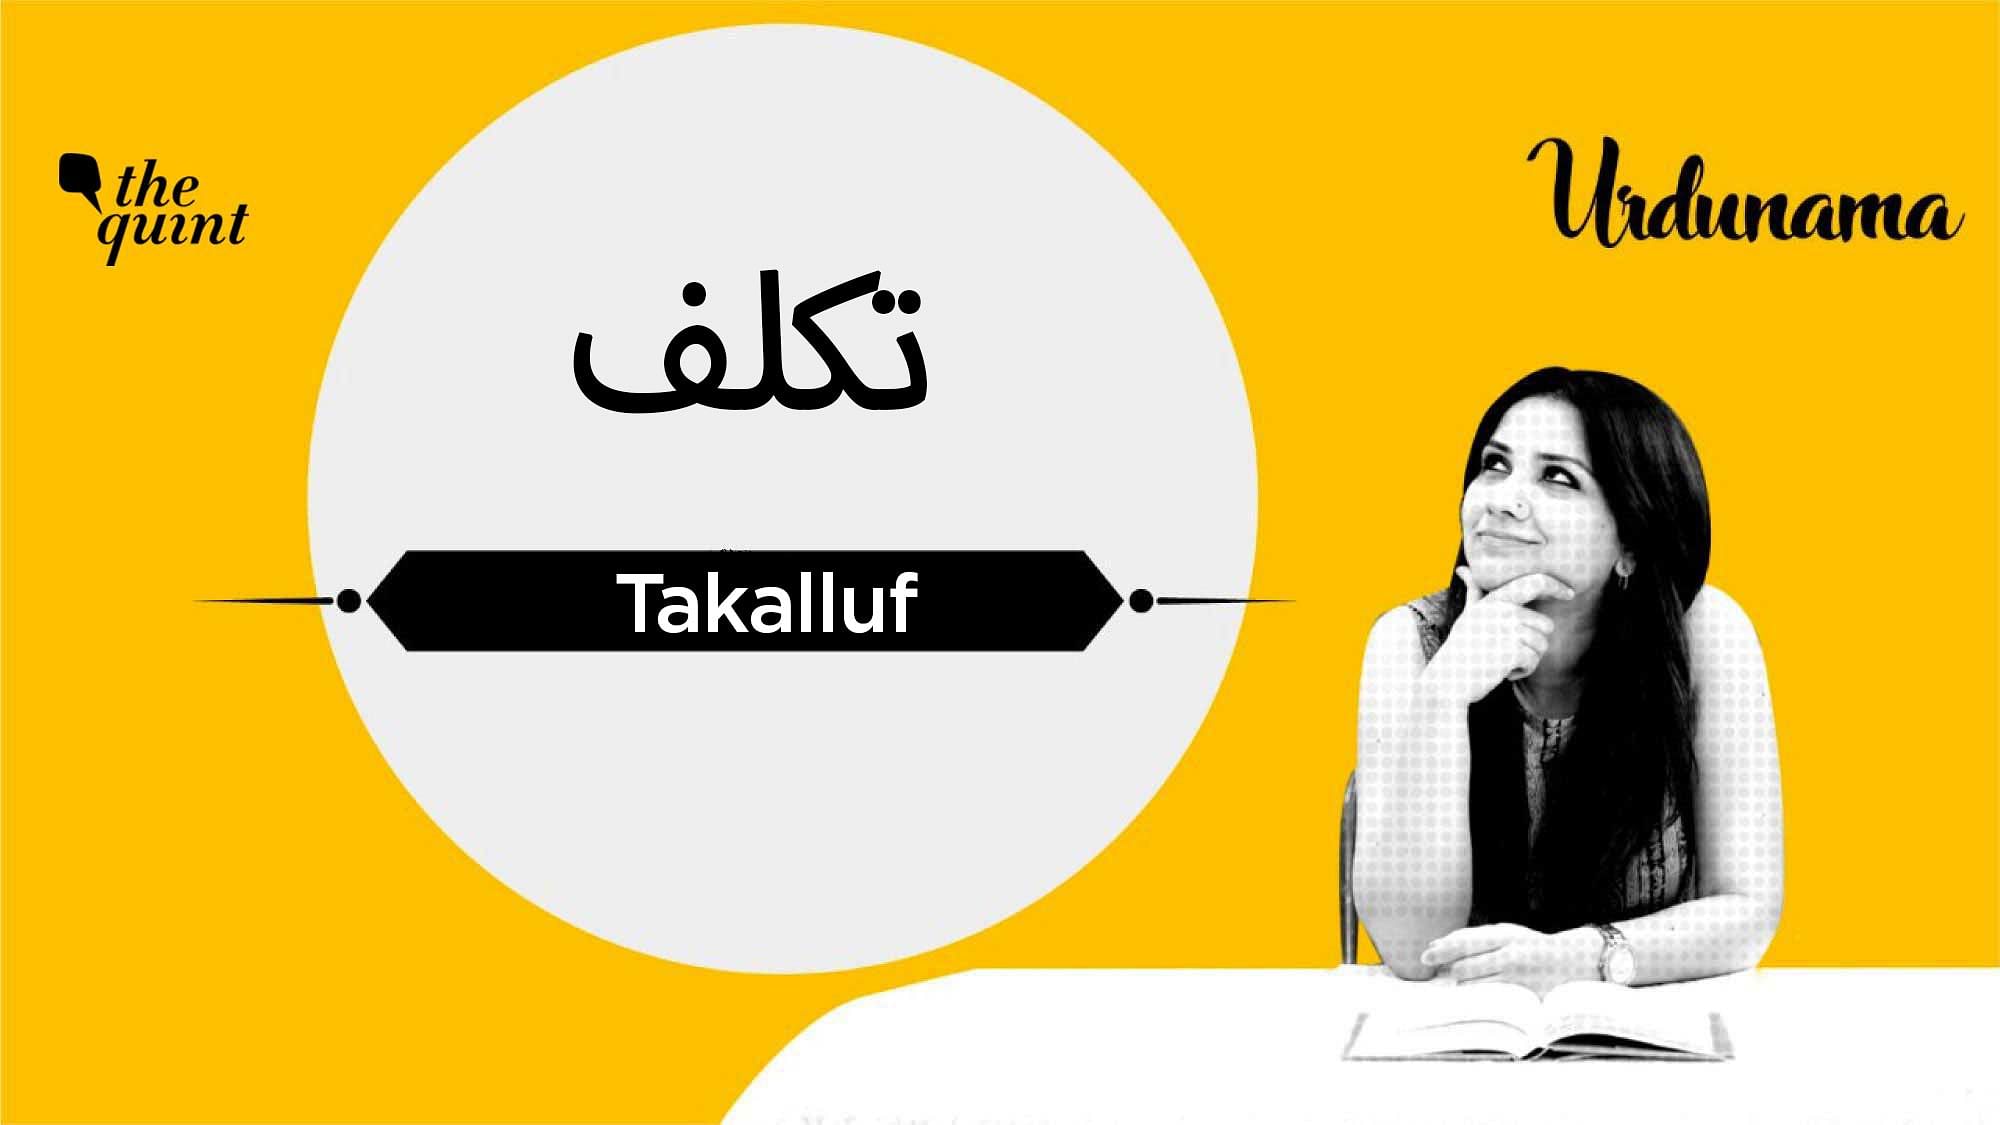 How different levels of takalluf could mean different possibilities of connection among people? Tune in.&nbsp;